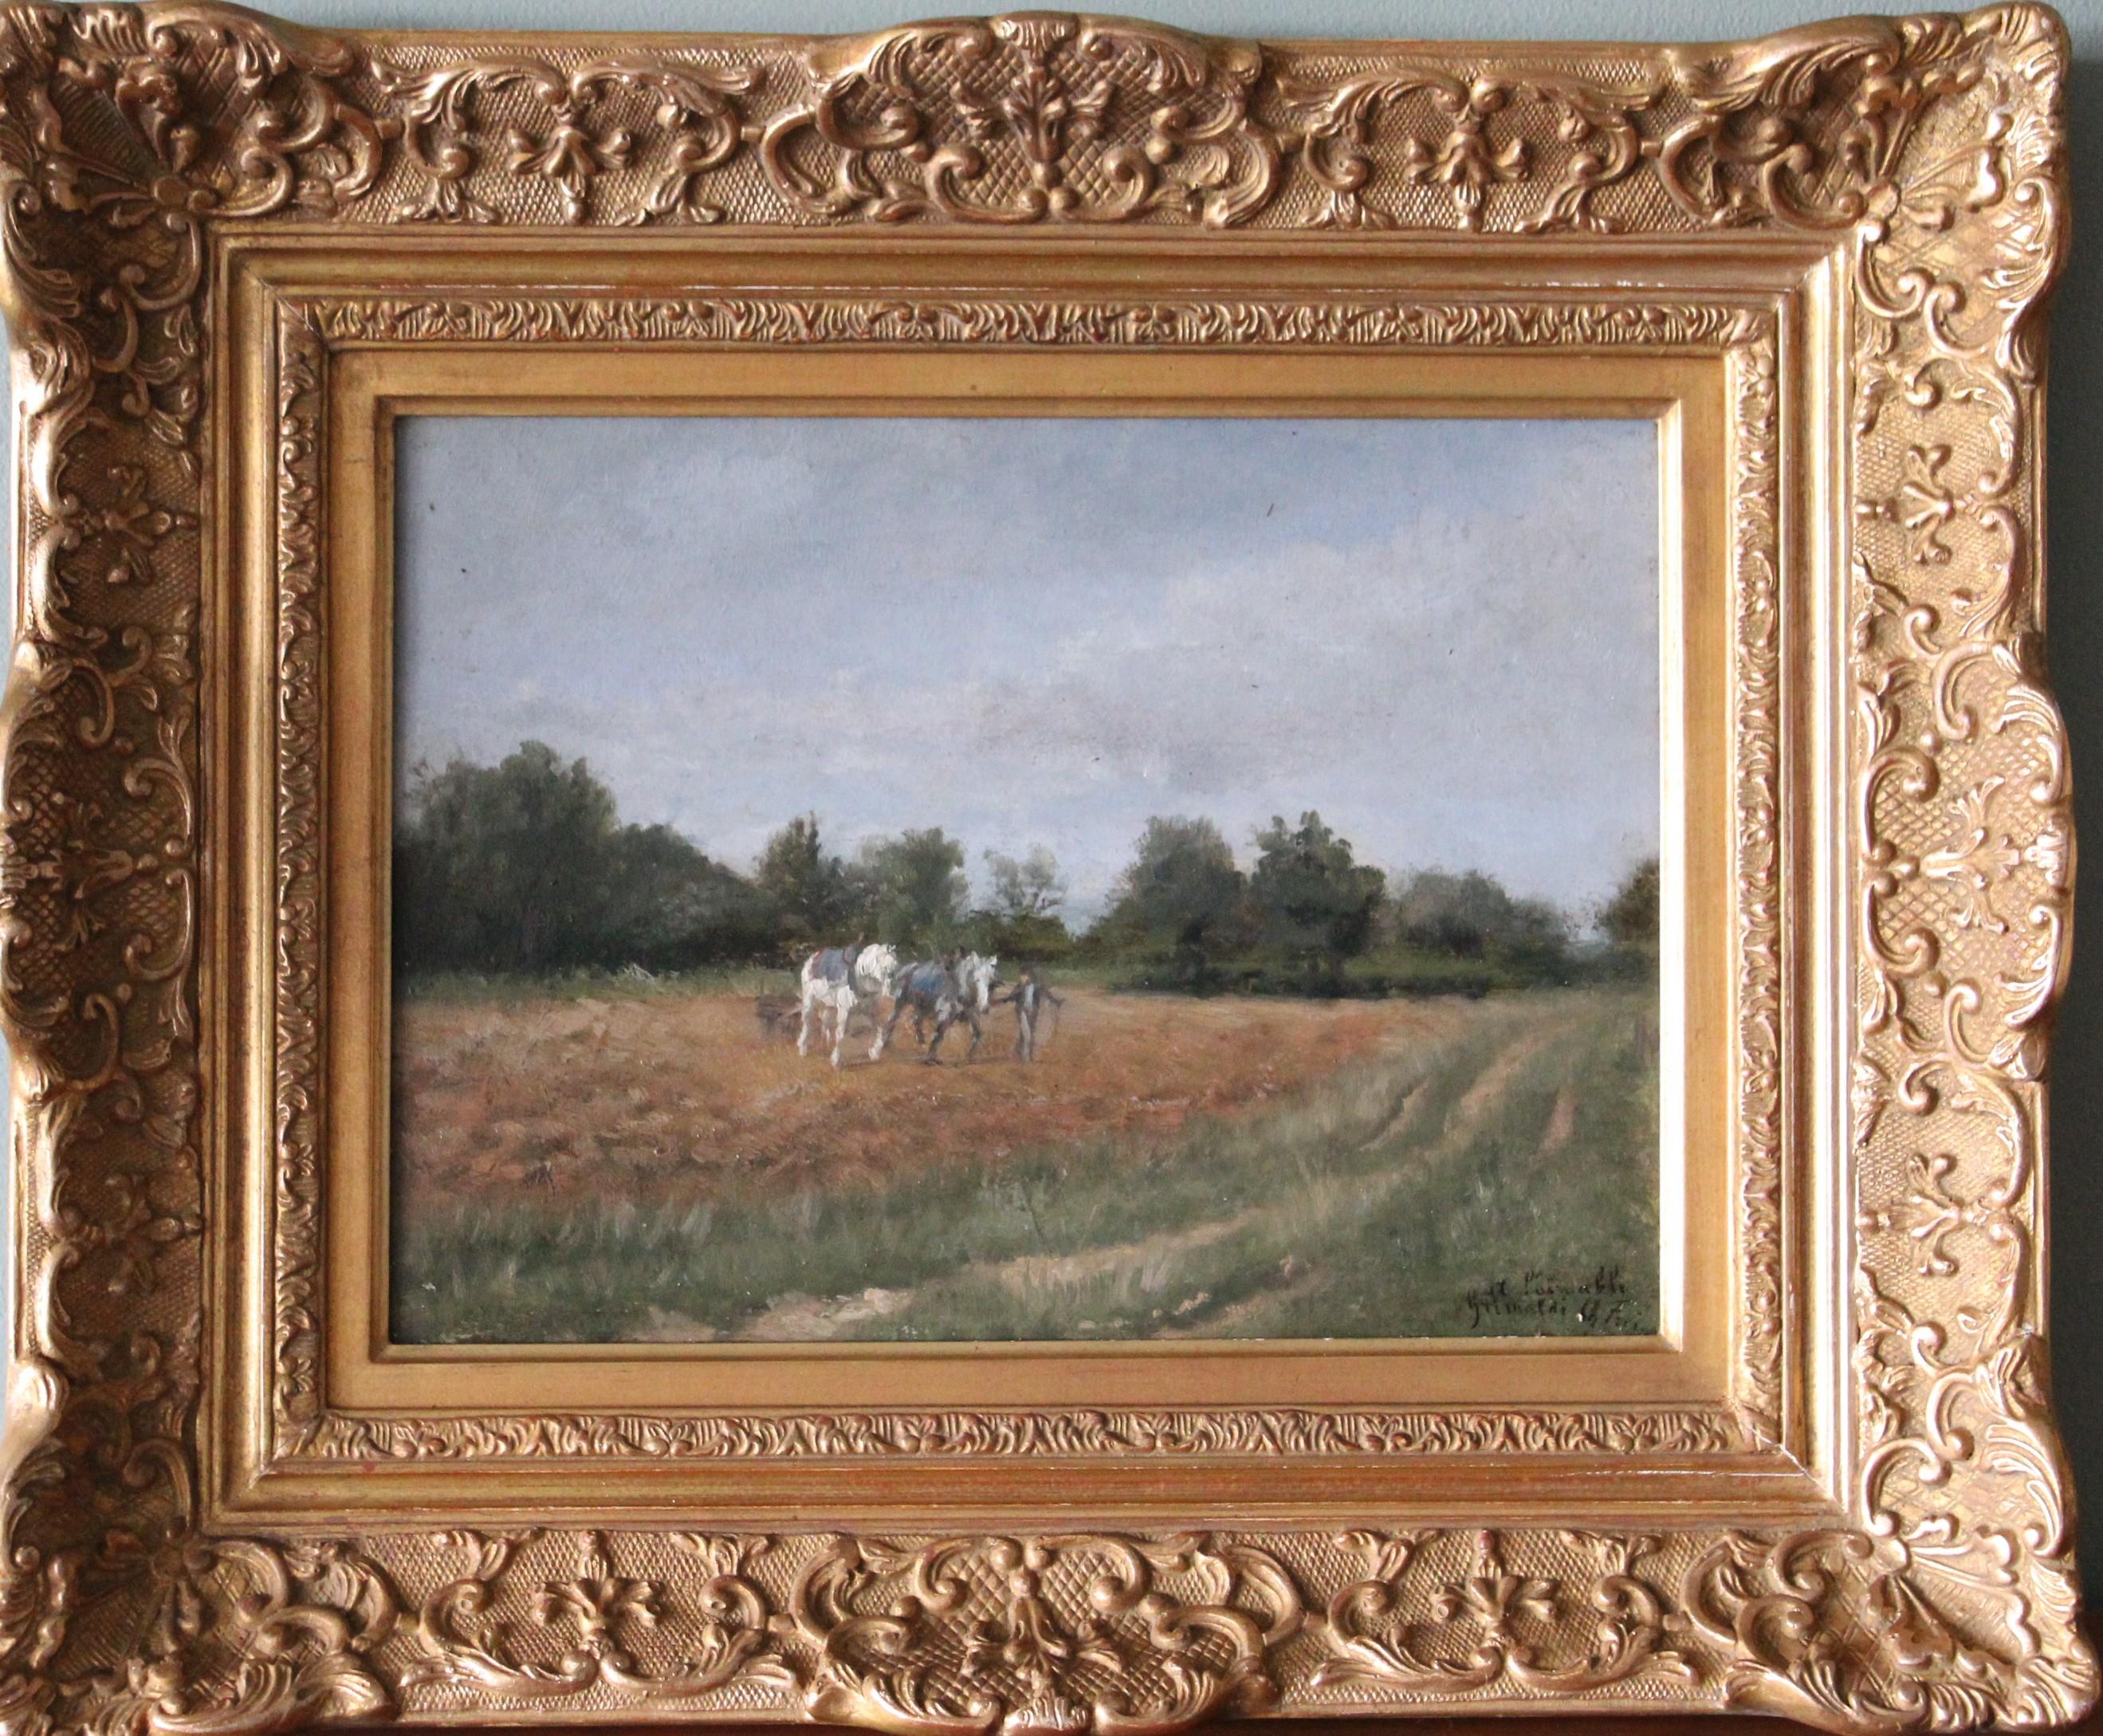 Charles Edouard Frère Animal Painting - Antique landscape oil painting of horses ploughing a field, horses in landscape